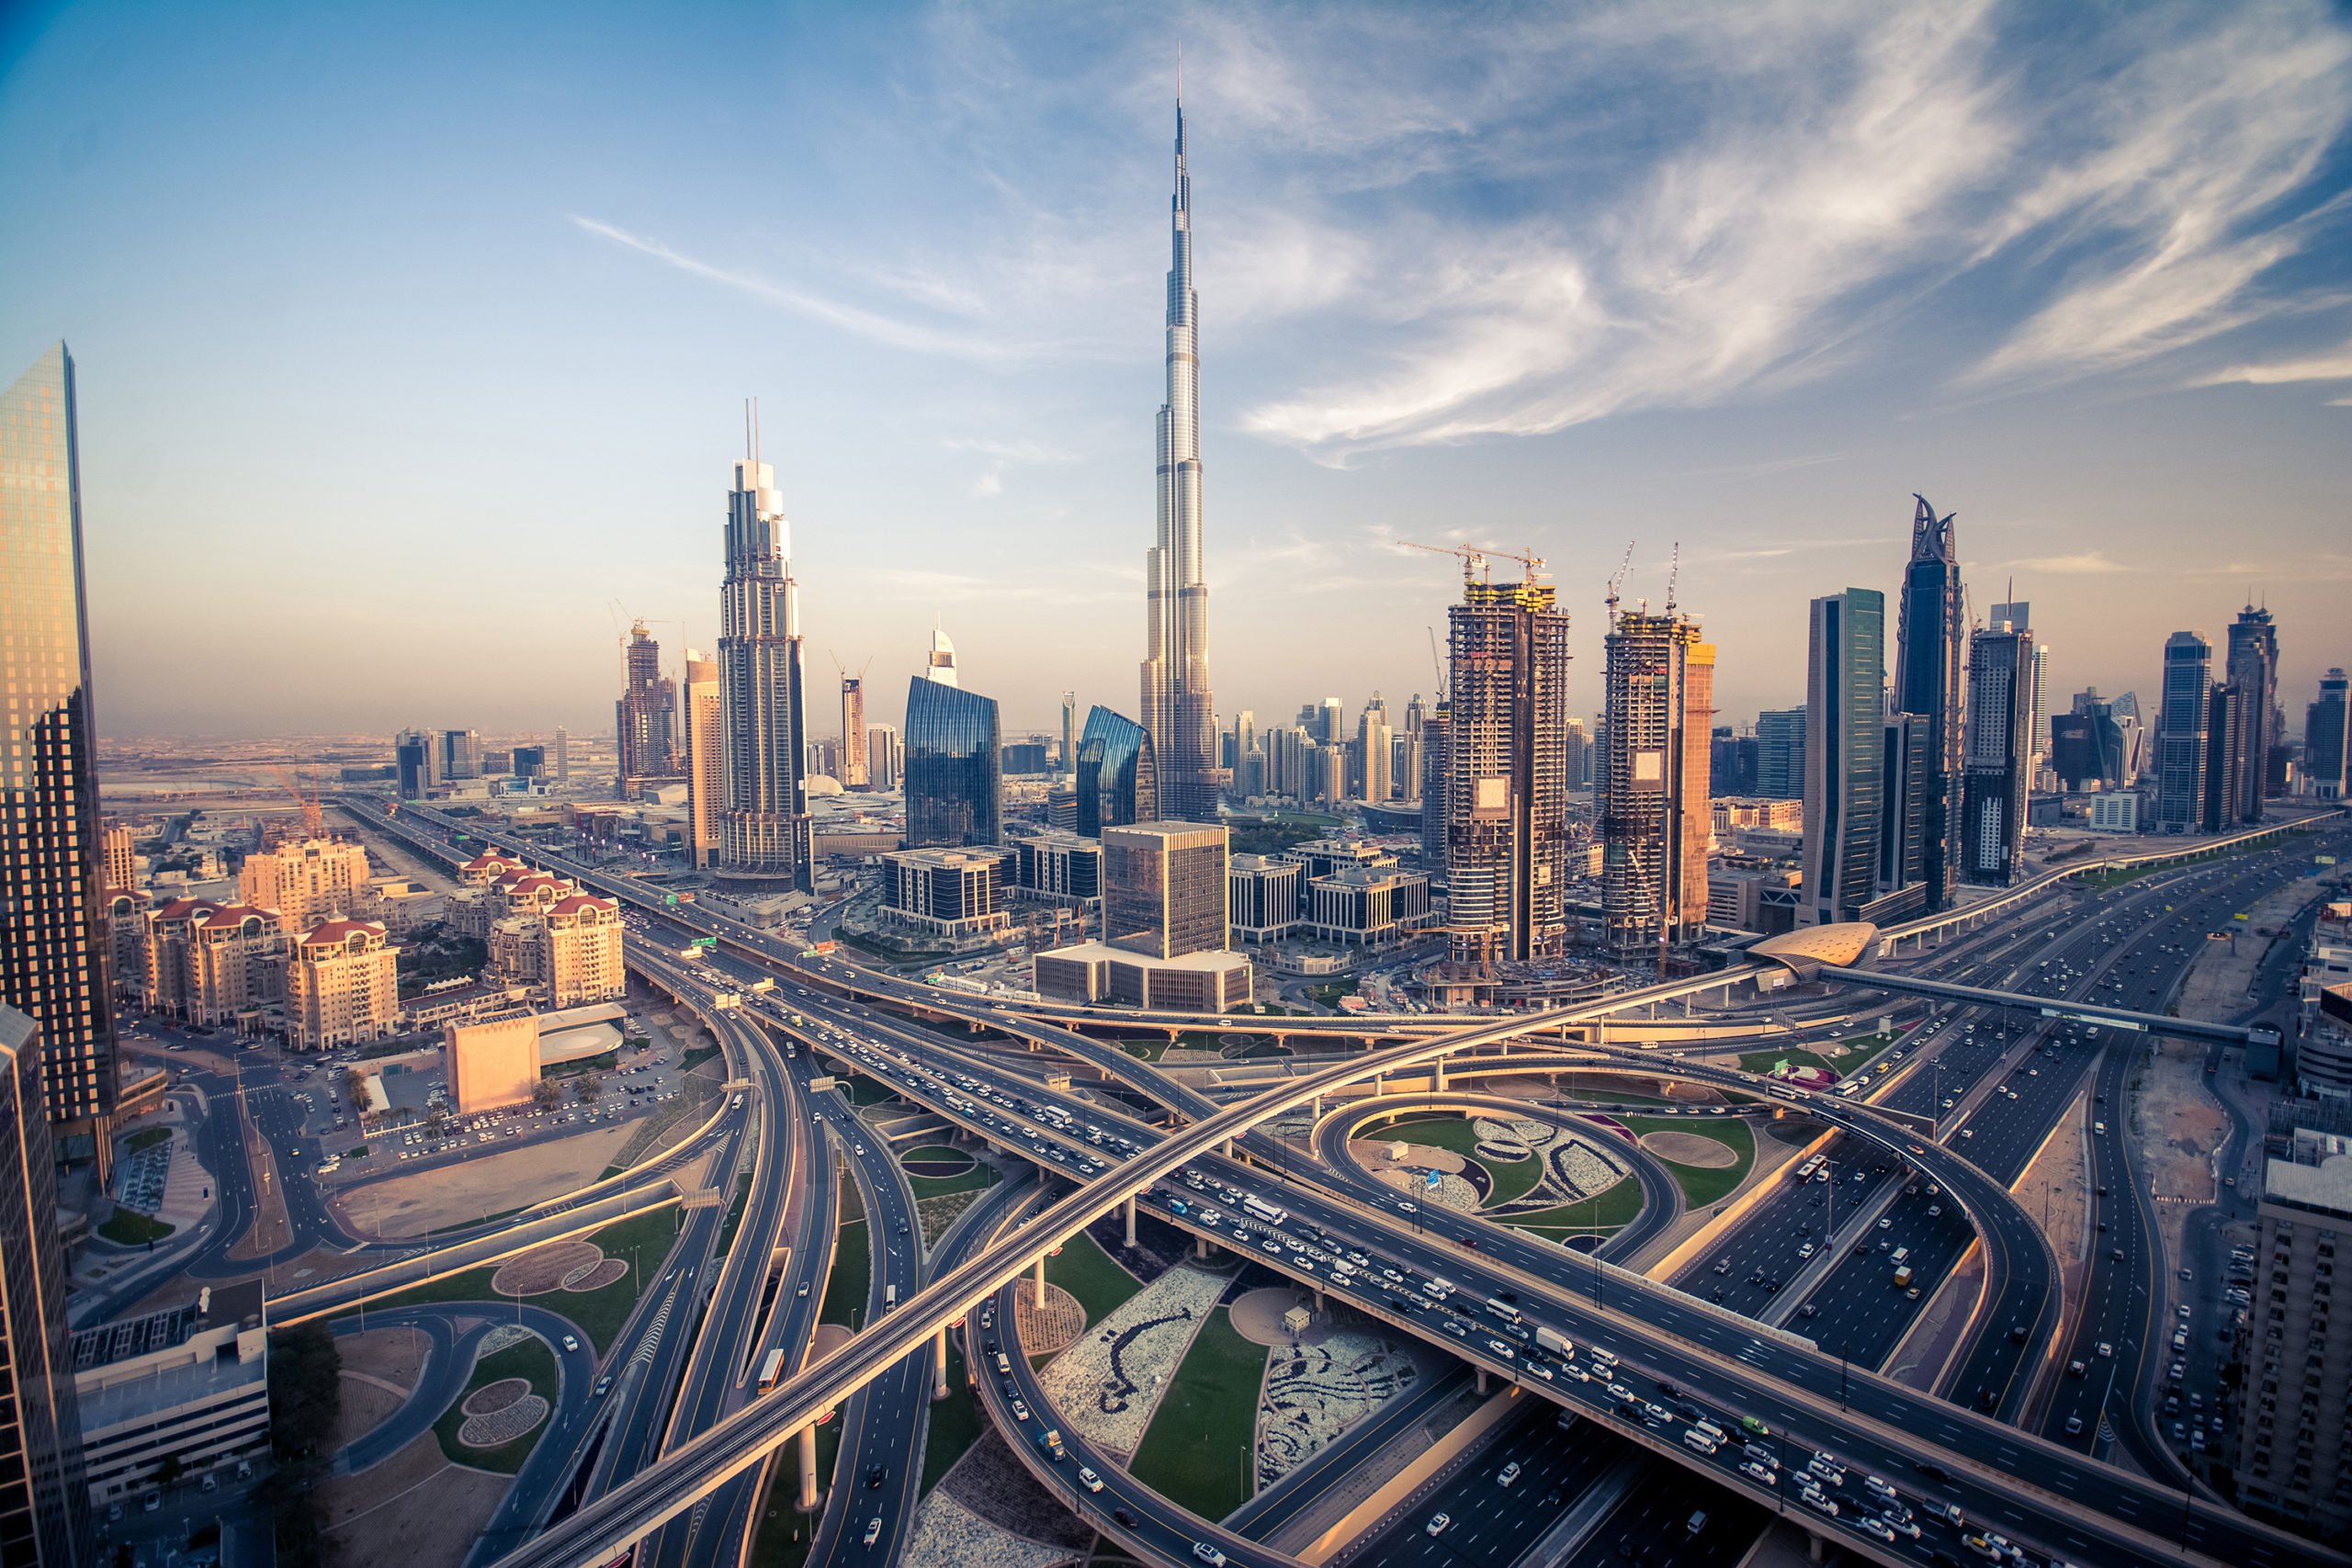 Dubai wants to be the new capital for crypto and oligarchs.